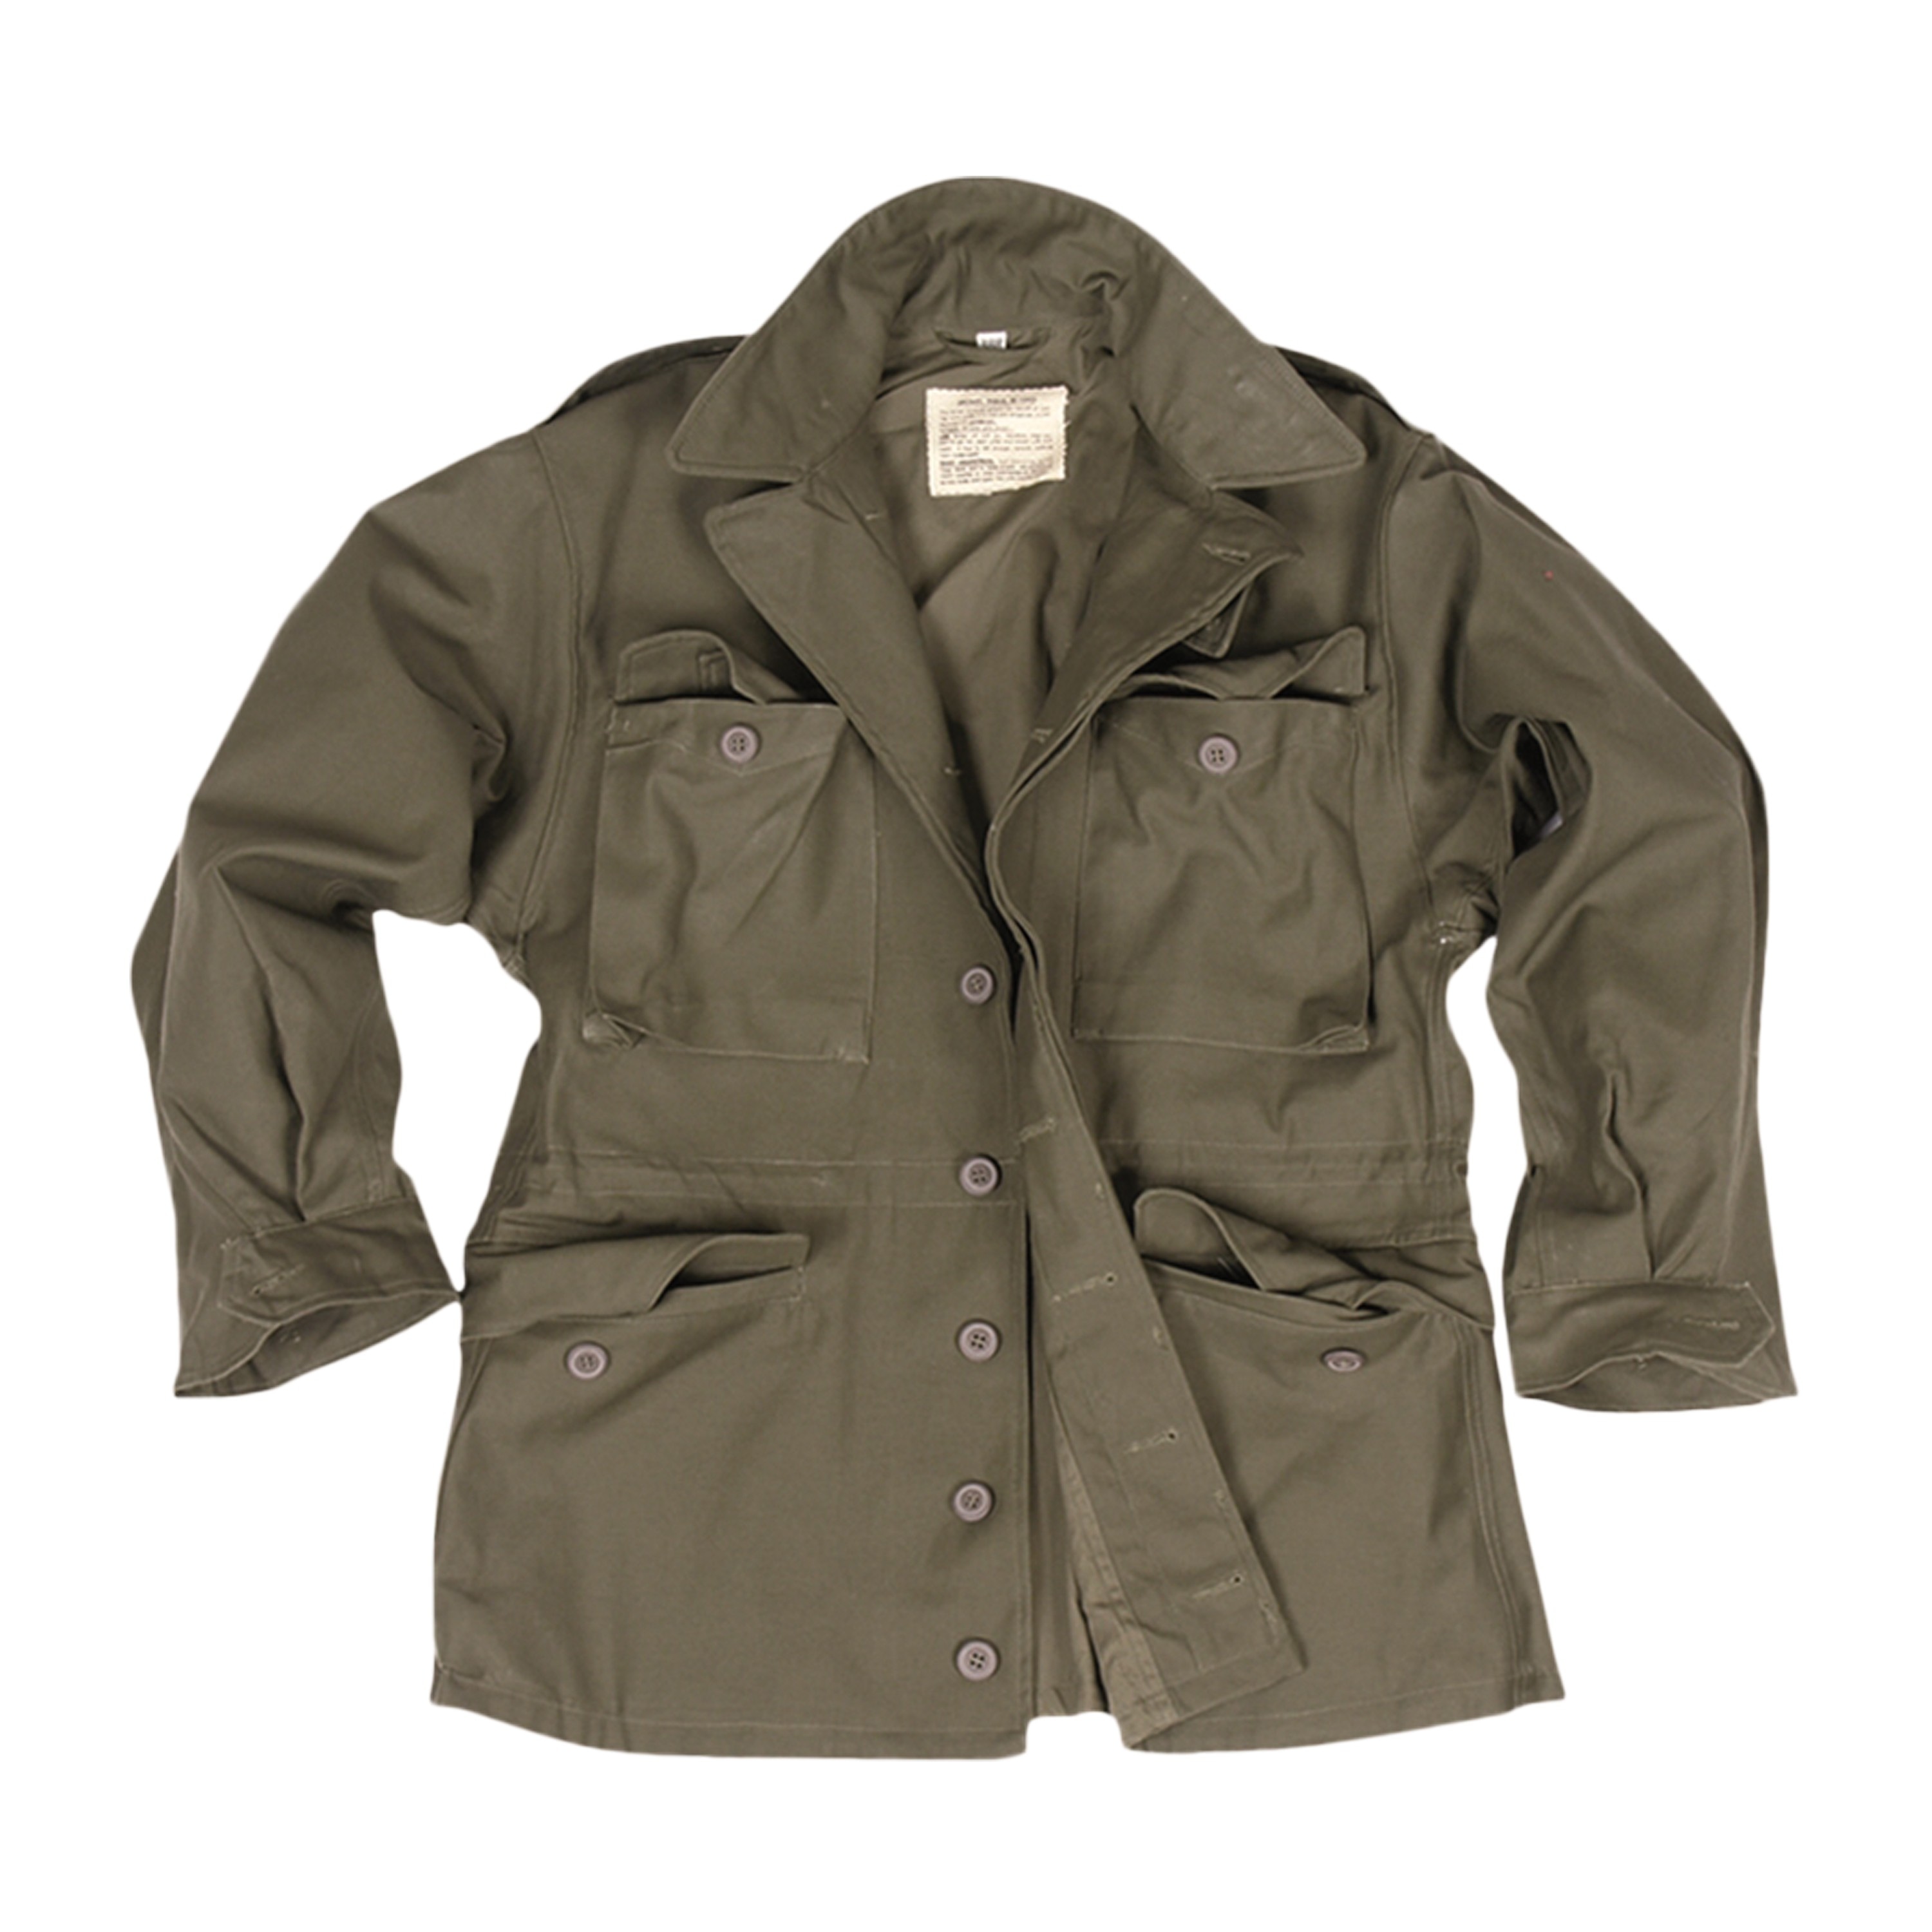 Purchase the U.S. M43 Field Jacket Reproduction by ASMC